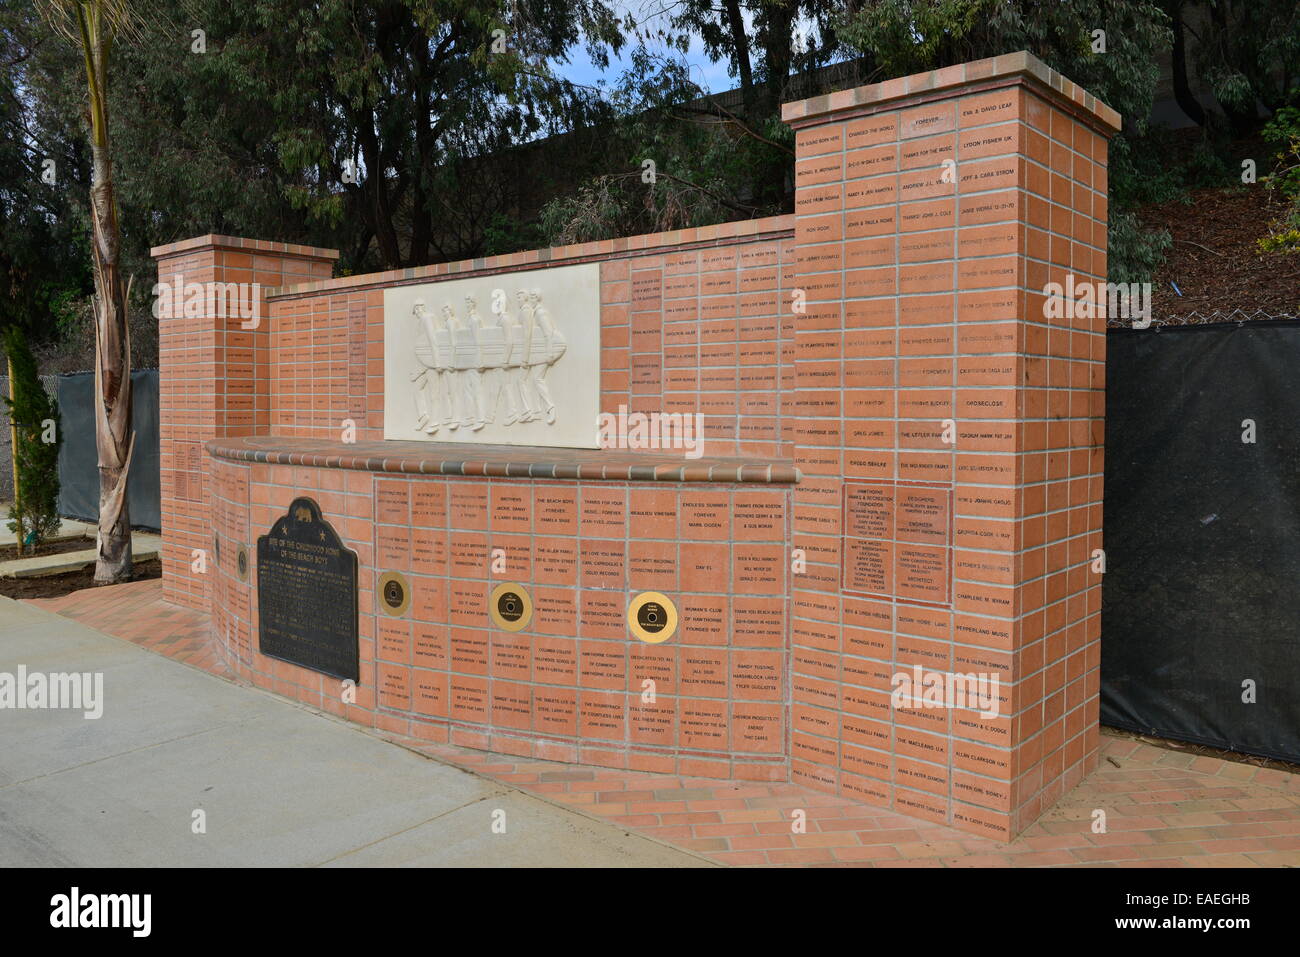 Beach Boys Memorial of where they were raised at Hawthorne county, Los Angeles. Stock Photo